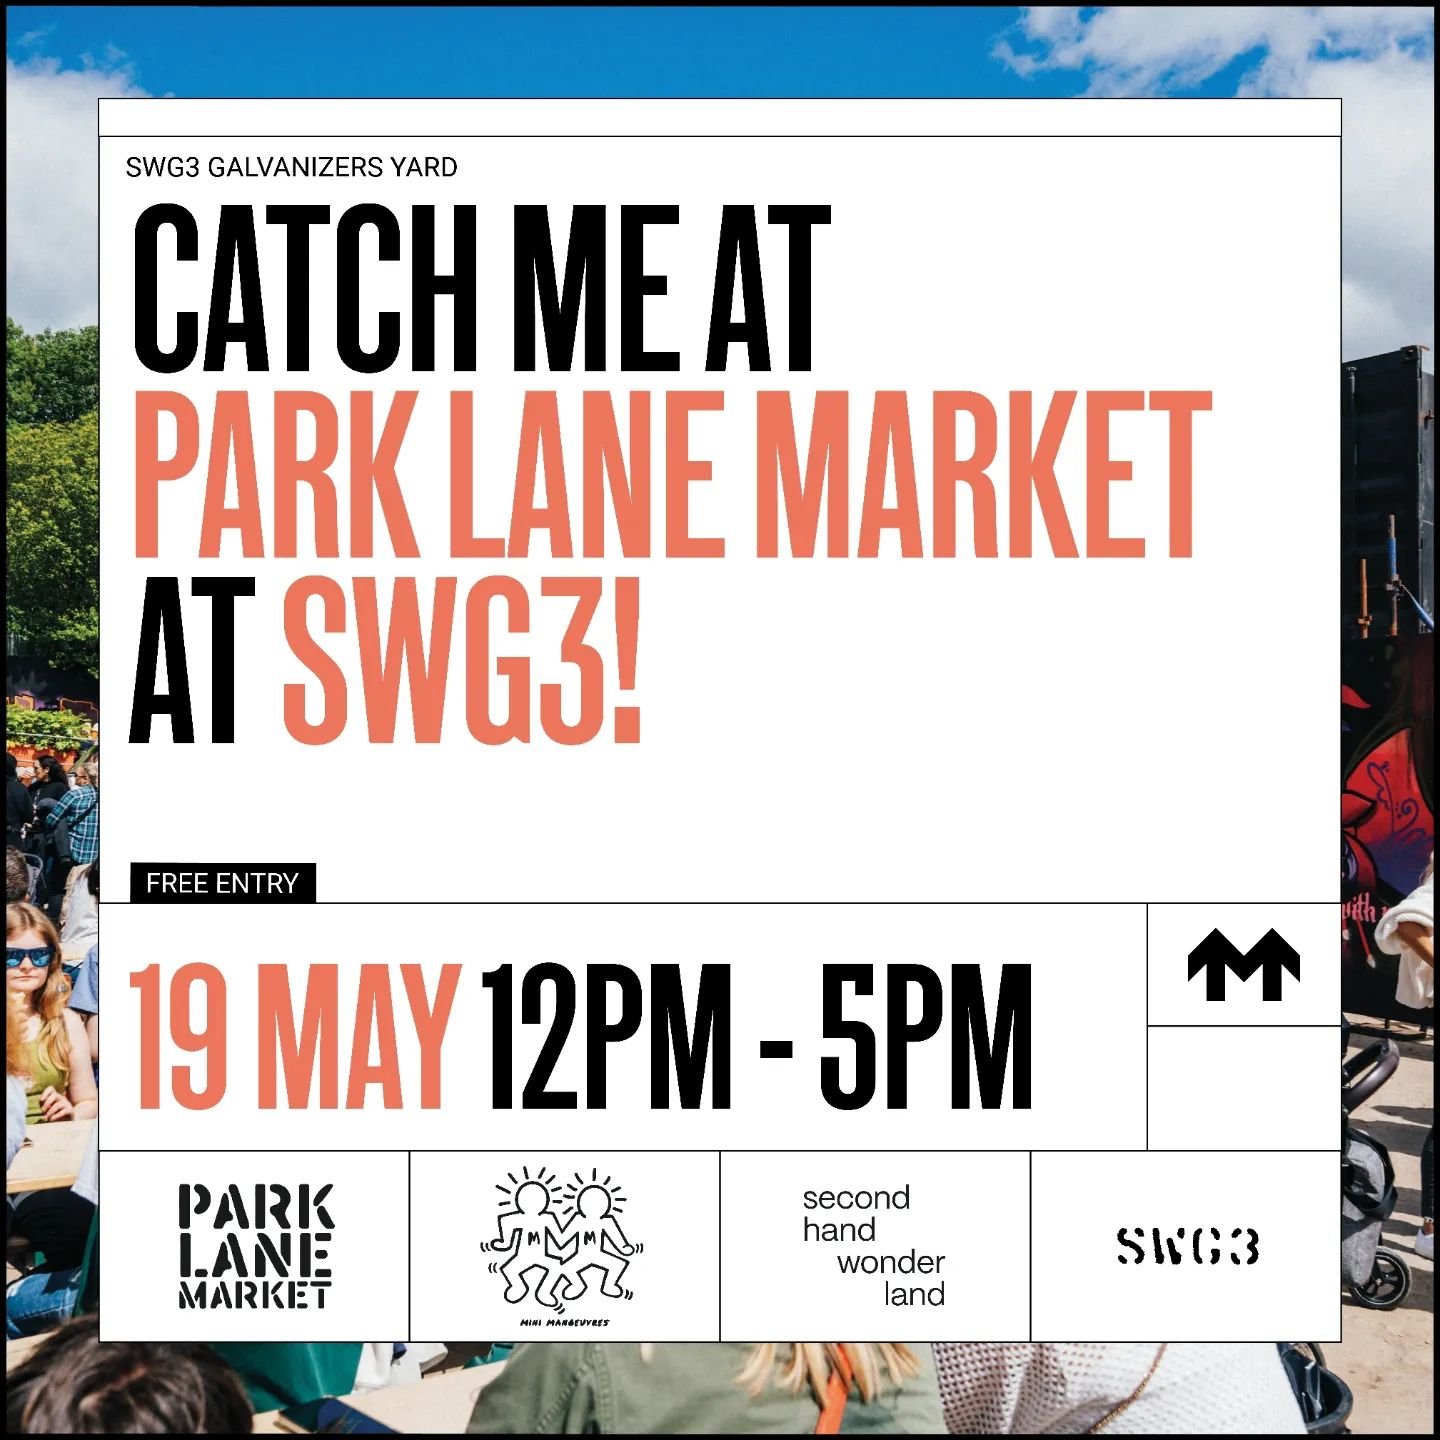 My next market is this Sunday at @swg3glasgow for a special rendition of @parklane.market 

12-5pm

See ya there 👋

#parklanemarket #swg3 #glasgow #glasgowevents #glasgowmarkets #sundayplans #marketdates #upcomingmarkets #whatsonglasgow